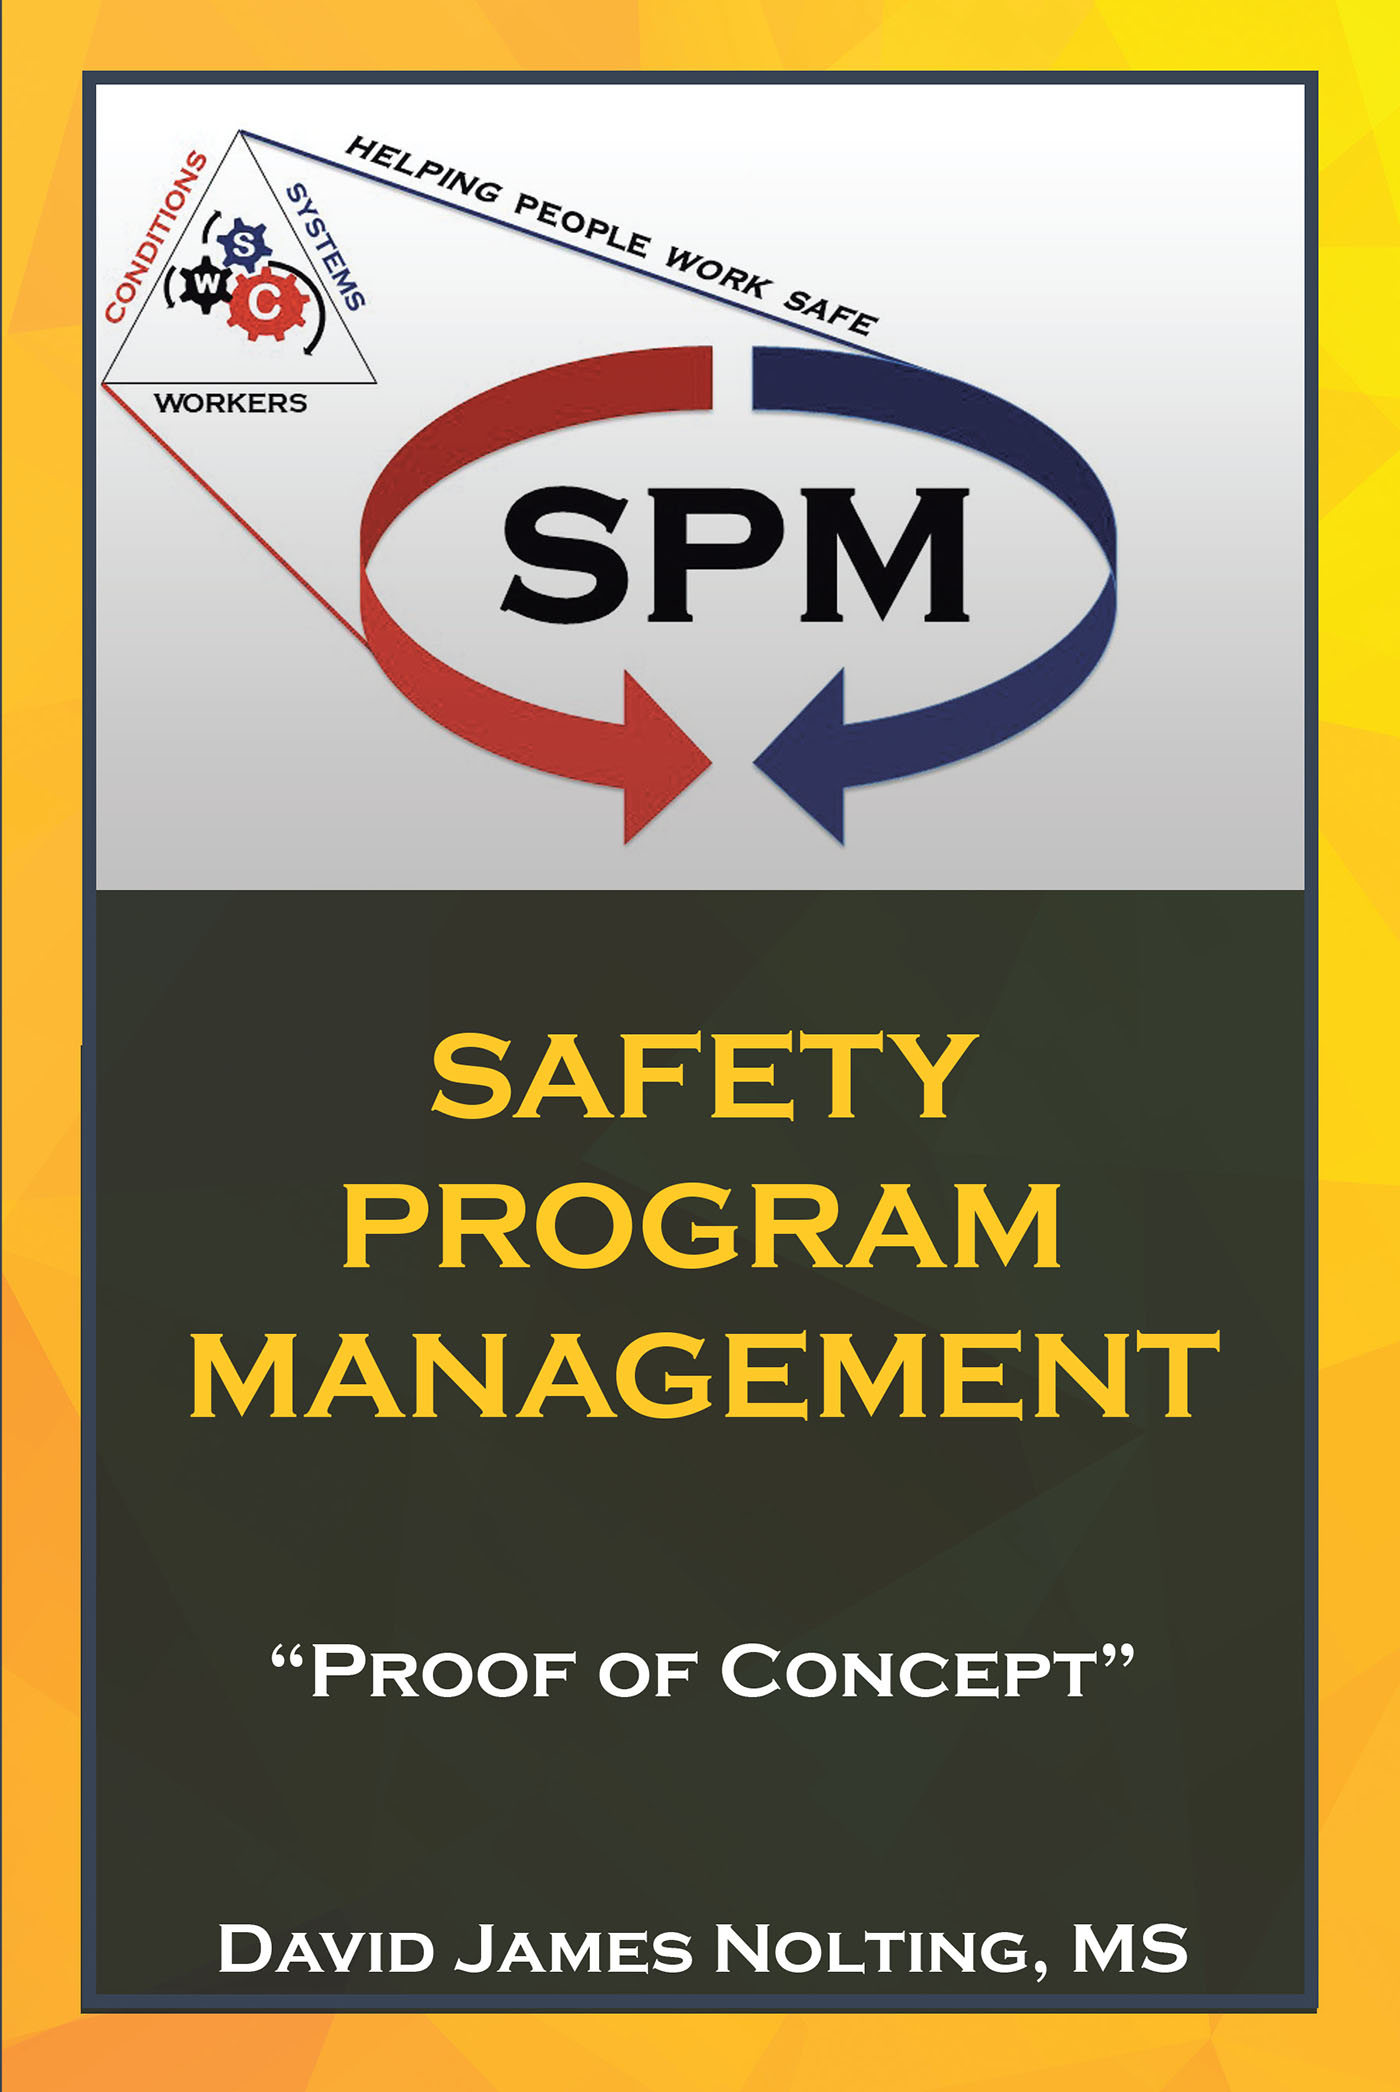 David James Nolting, MS’s Newly Released “Safety Program Management: 'Proof of Concept'” is a Helpful Resource for Members of the Safety Industry